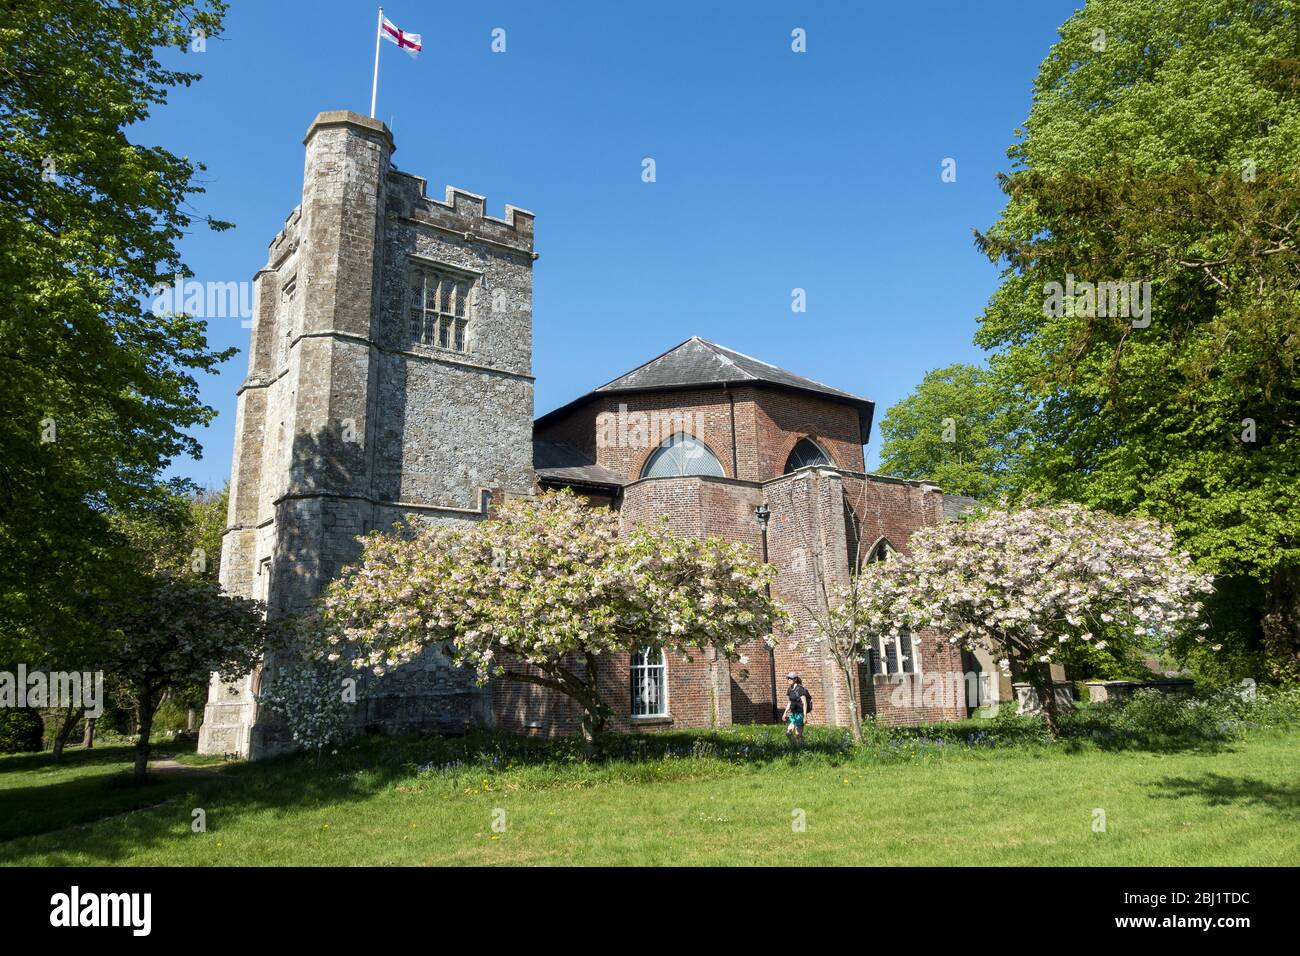 St Mary the Virgin church in the beautiful village of Micheldever in Hampshire, England, UK Stock Photo